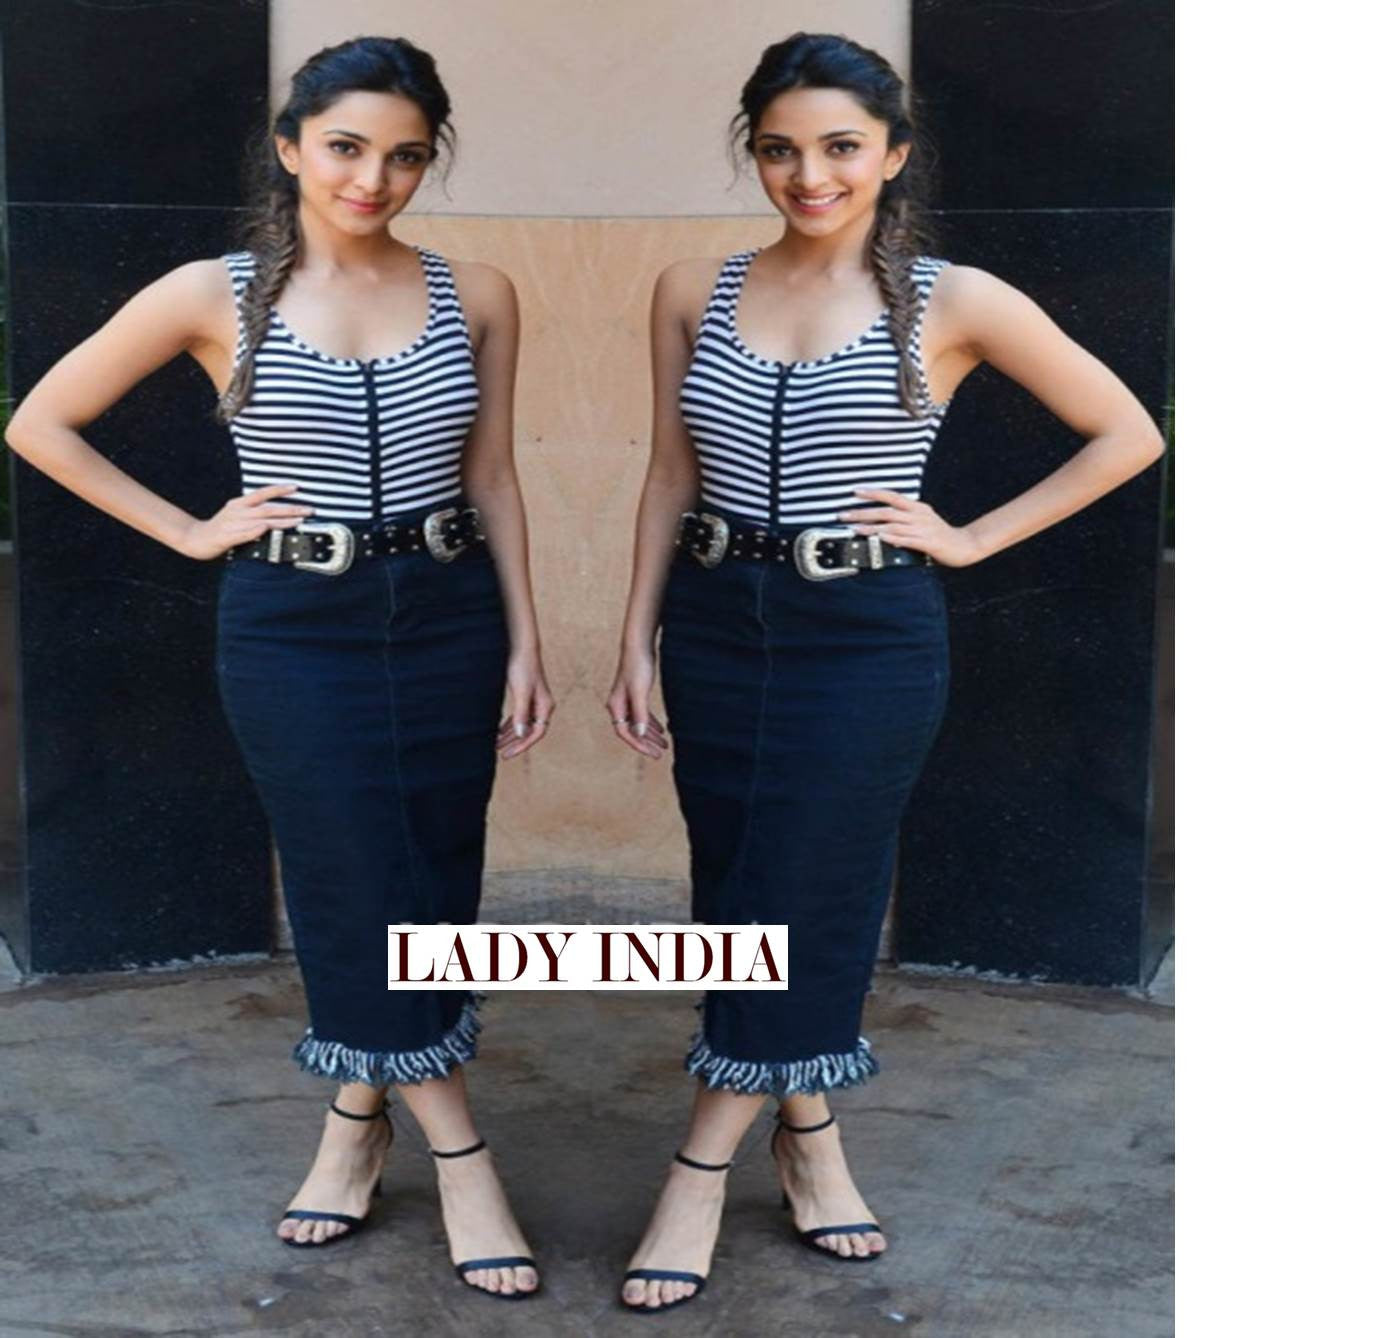 Kiara Advani Looked Refreshing in Striped Tank Top Featuring Front Zip ...